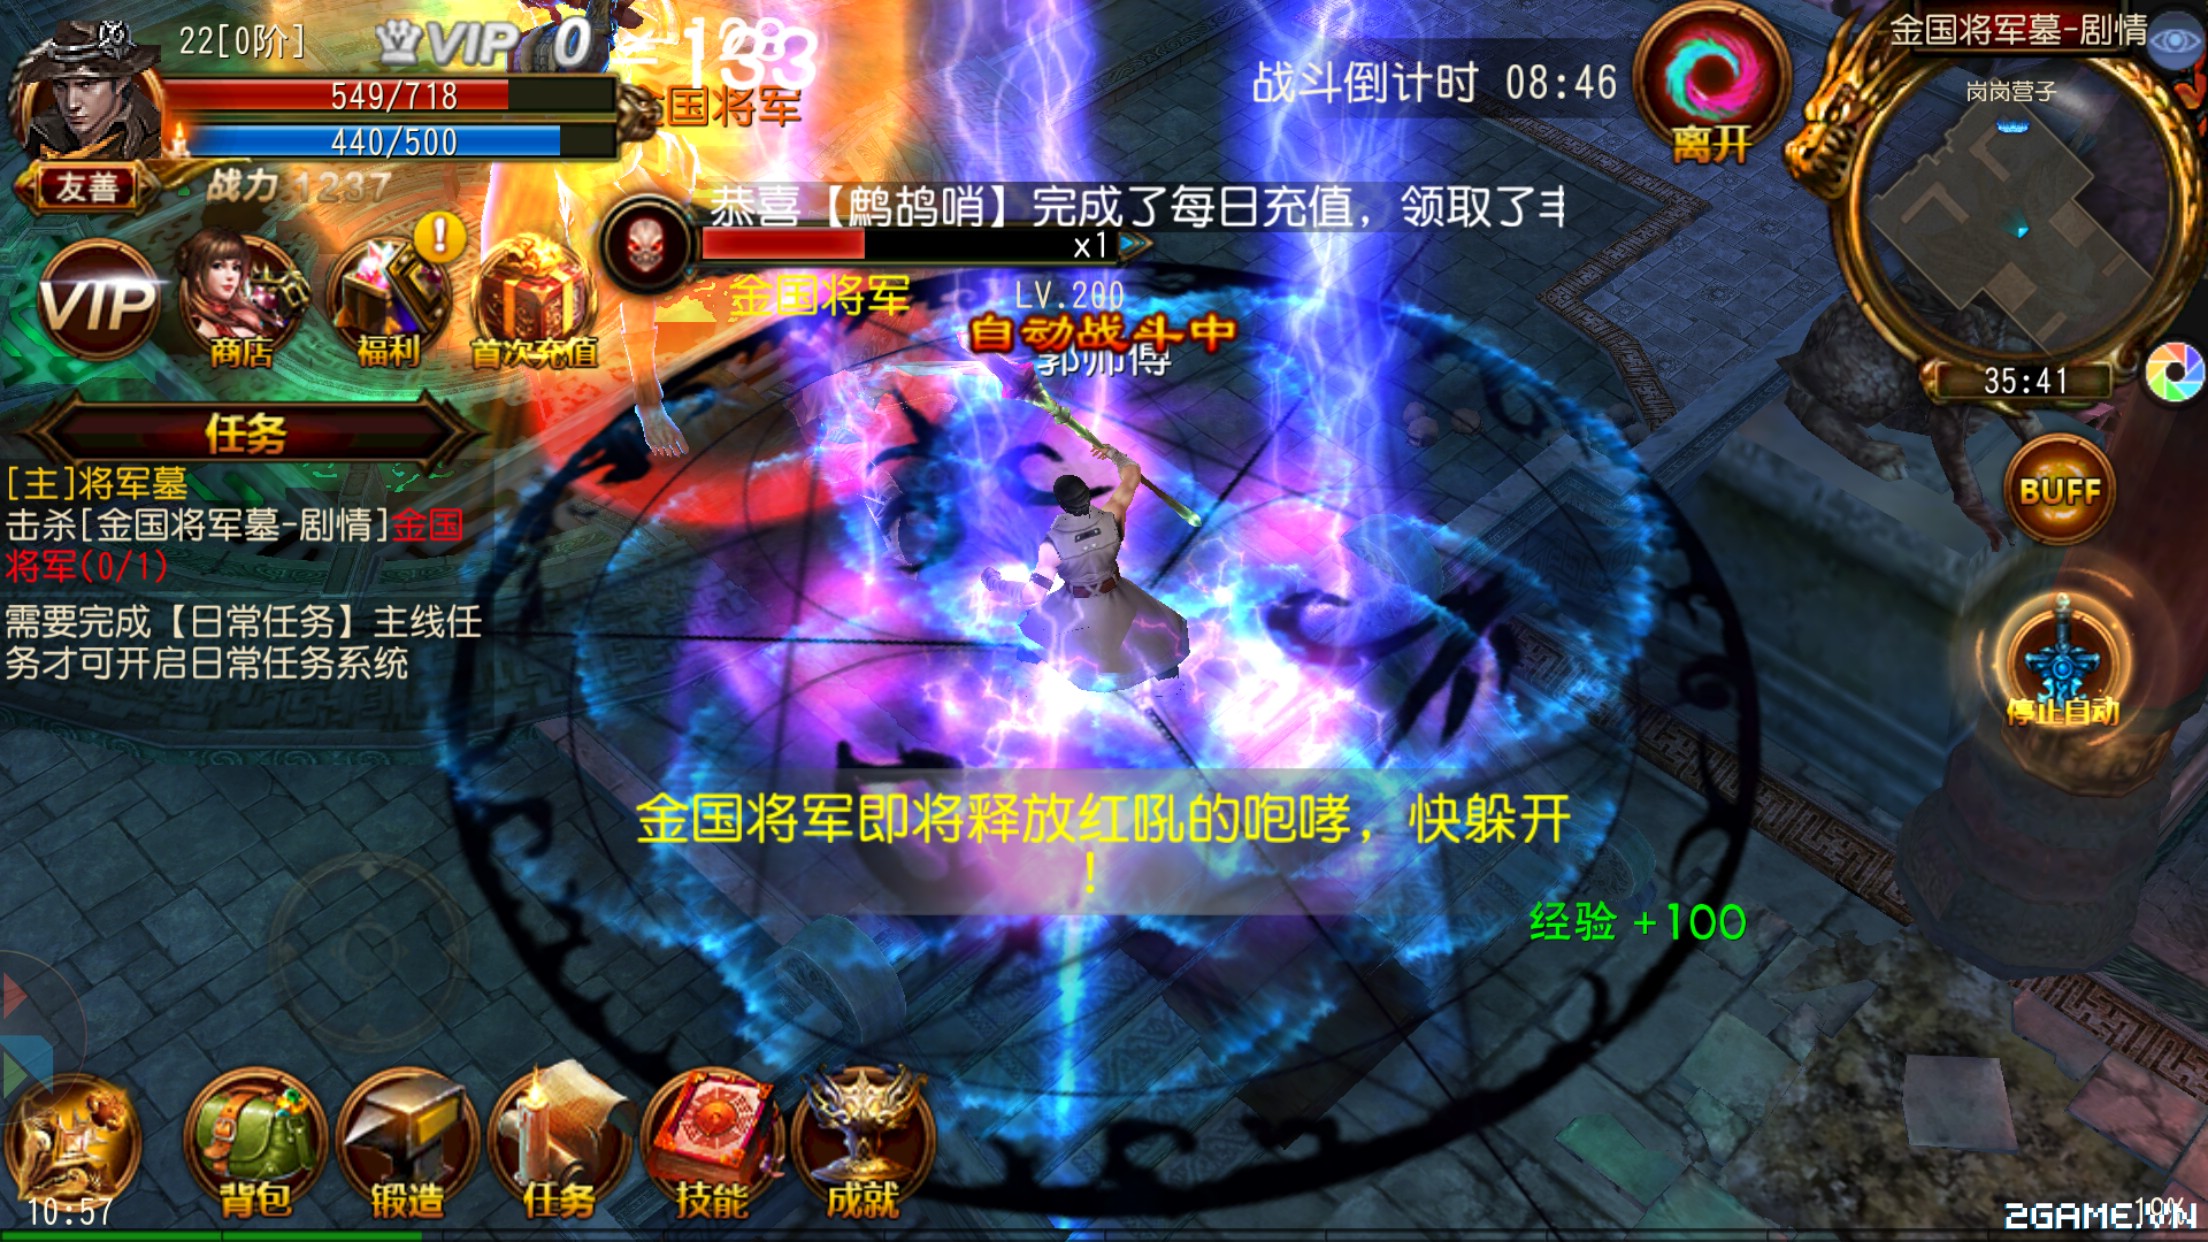 2game-ma-thoi-den-3d-mobile-anh-4s.jpg (2208×1242)